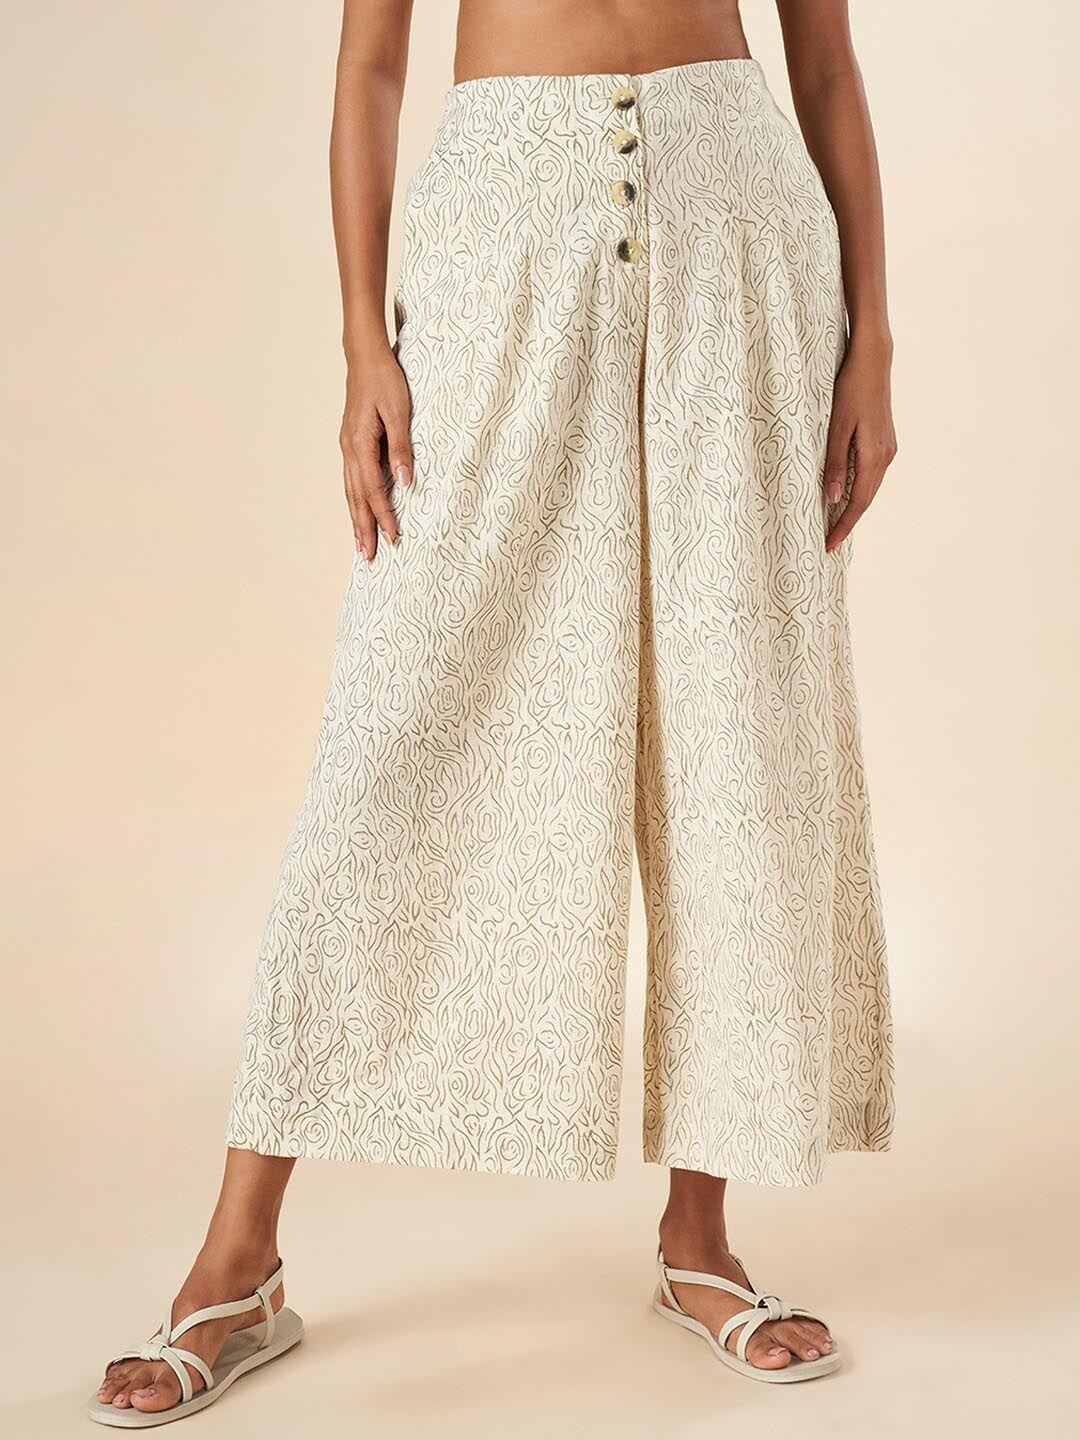 akkriti-by-pantaloons-women-flared-abstract-printed-cotton-cropped-parallel-trousers